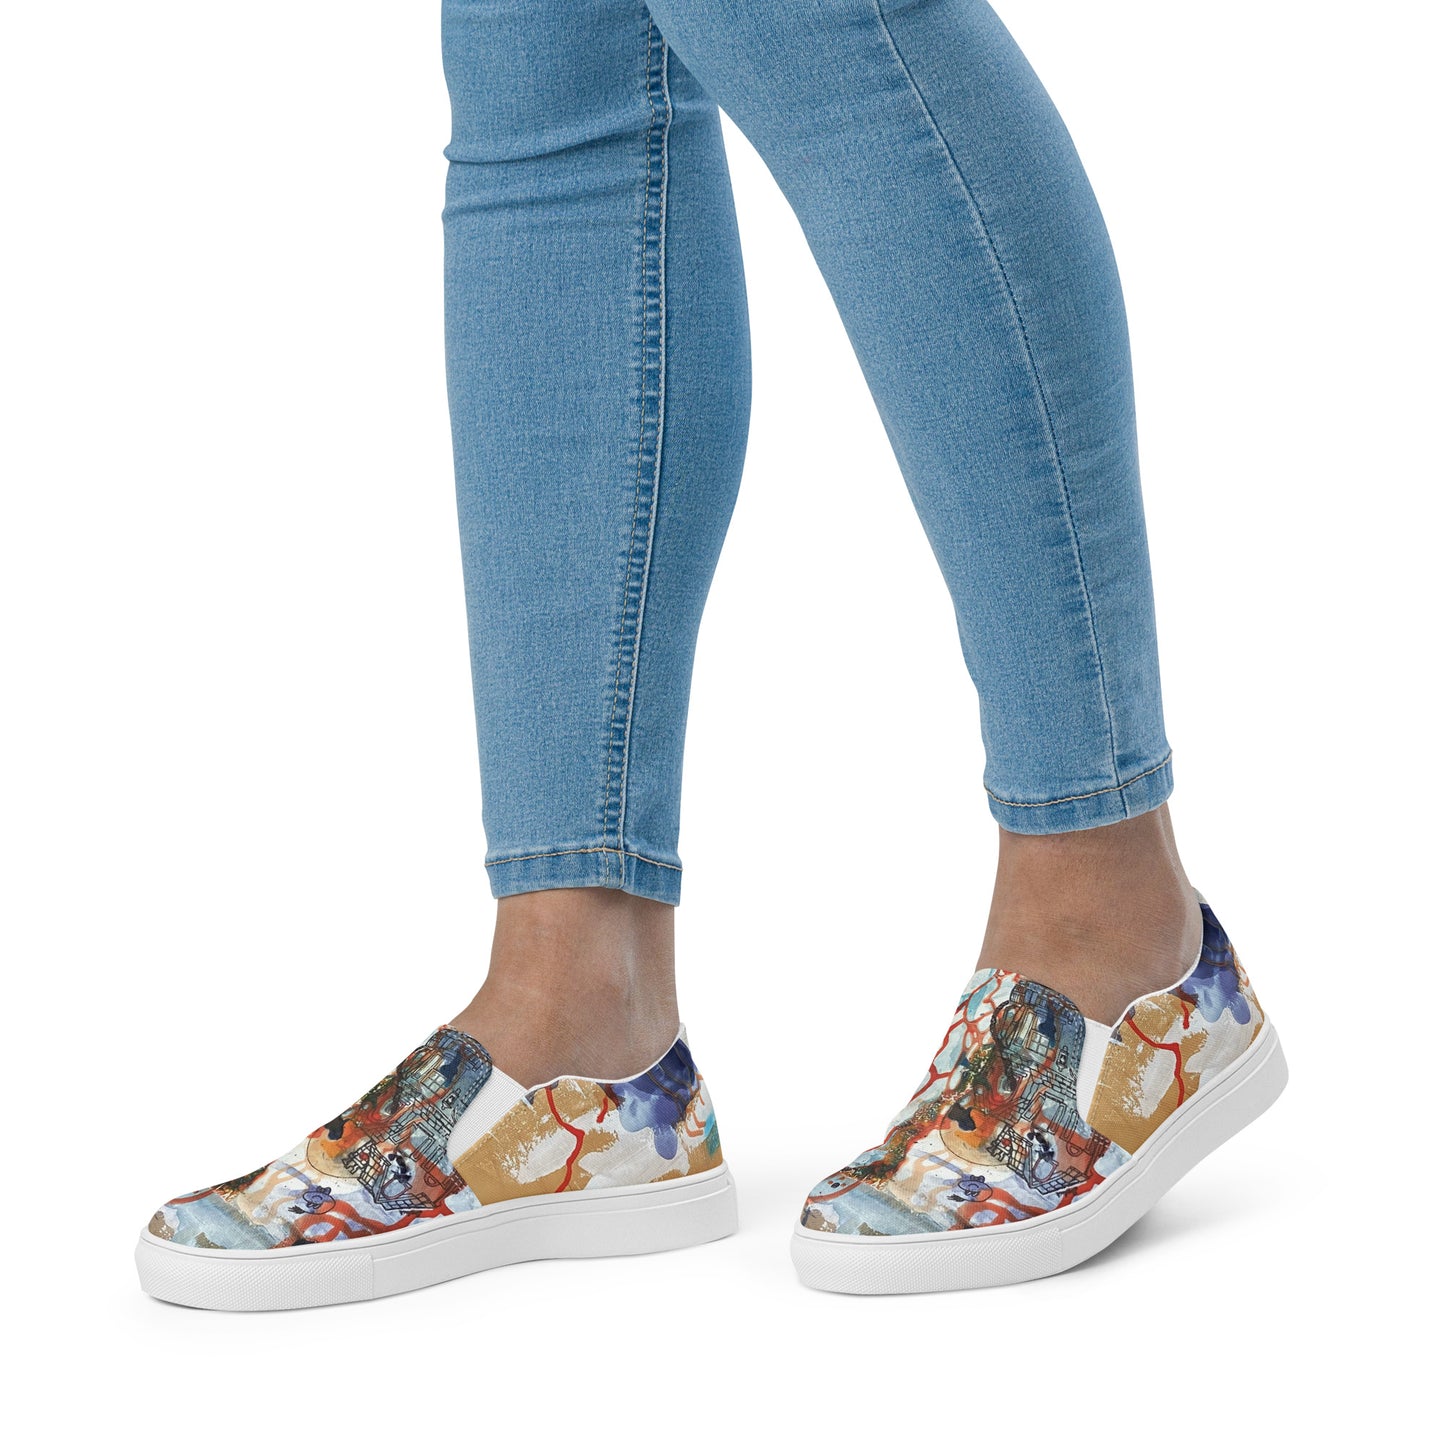 Women’s slip-on canvas shoes - Freedom